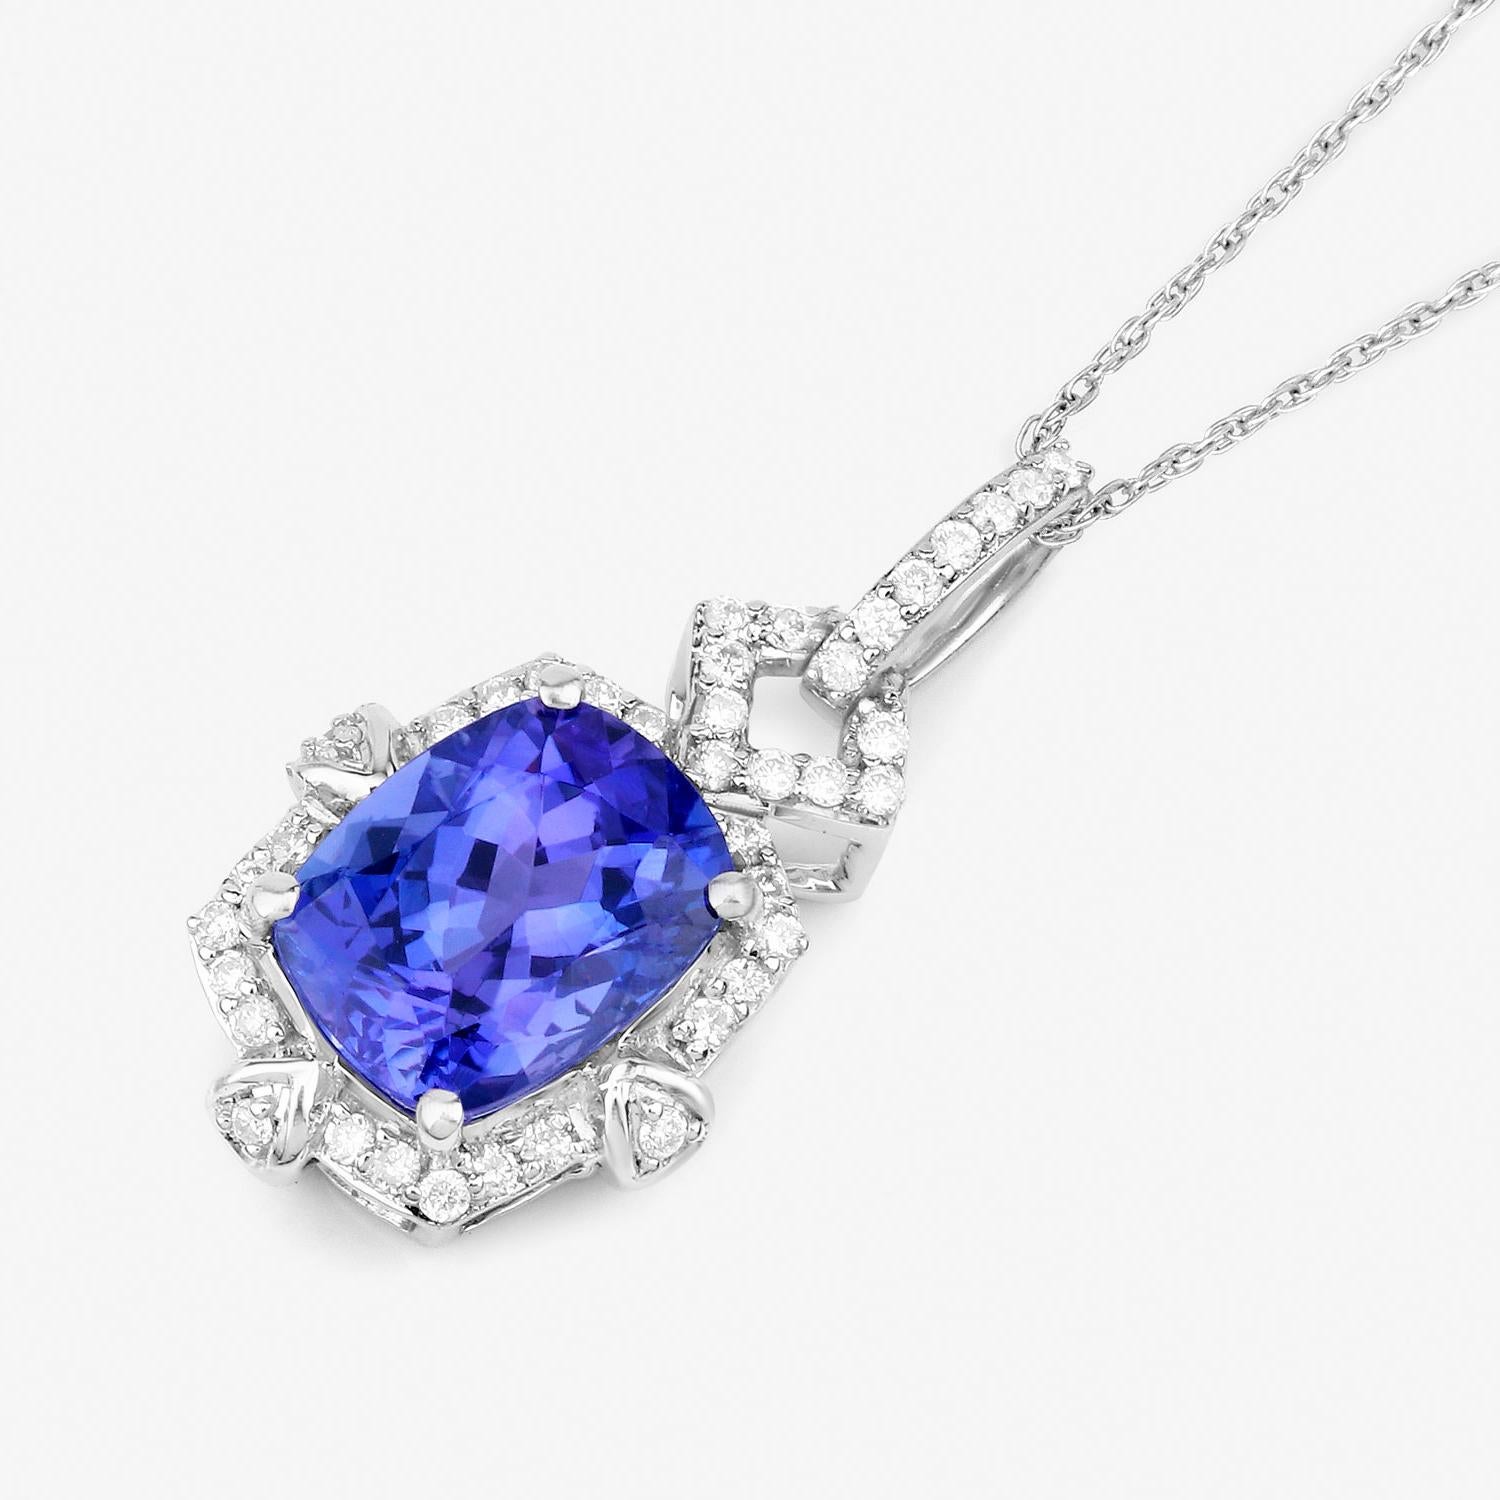 Tanzanite Necklace With Diamonds 2.74 Carats 14K White Gold In Excellent Condition For Sale In Laguna Niguel, CA